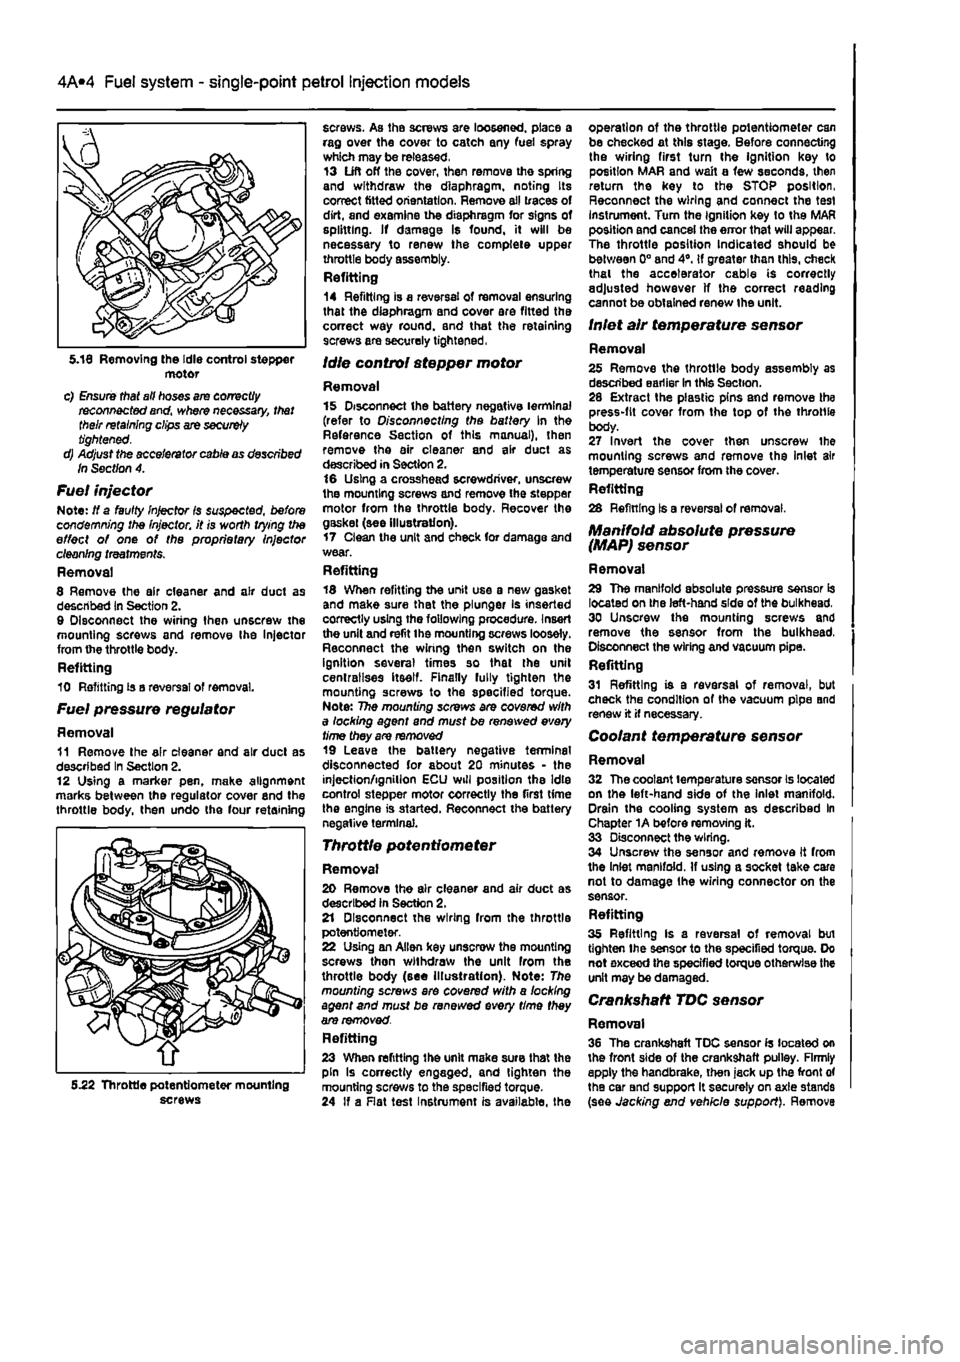 FIAT PUNTO 1994 176 / 1.G Owners Manual 
4A*2 Fuel system - single-point petrol Injection models 
motor c) Ensure that all hoses are correctly reconnected and, where necessary, that their retaining clips are securely tightened. d) Adjust th